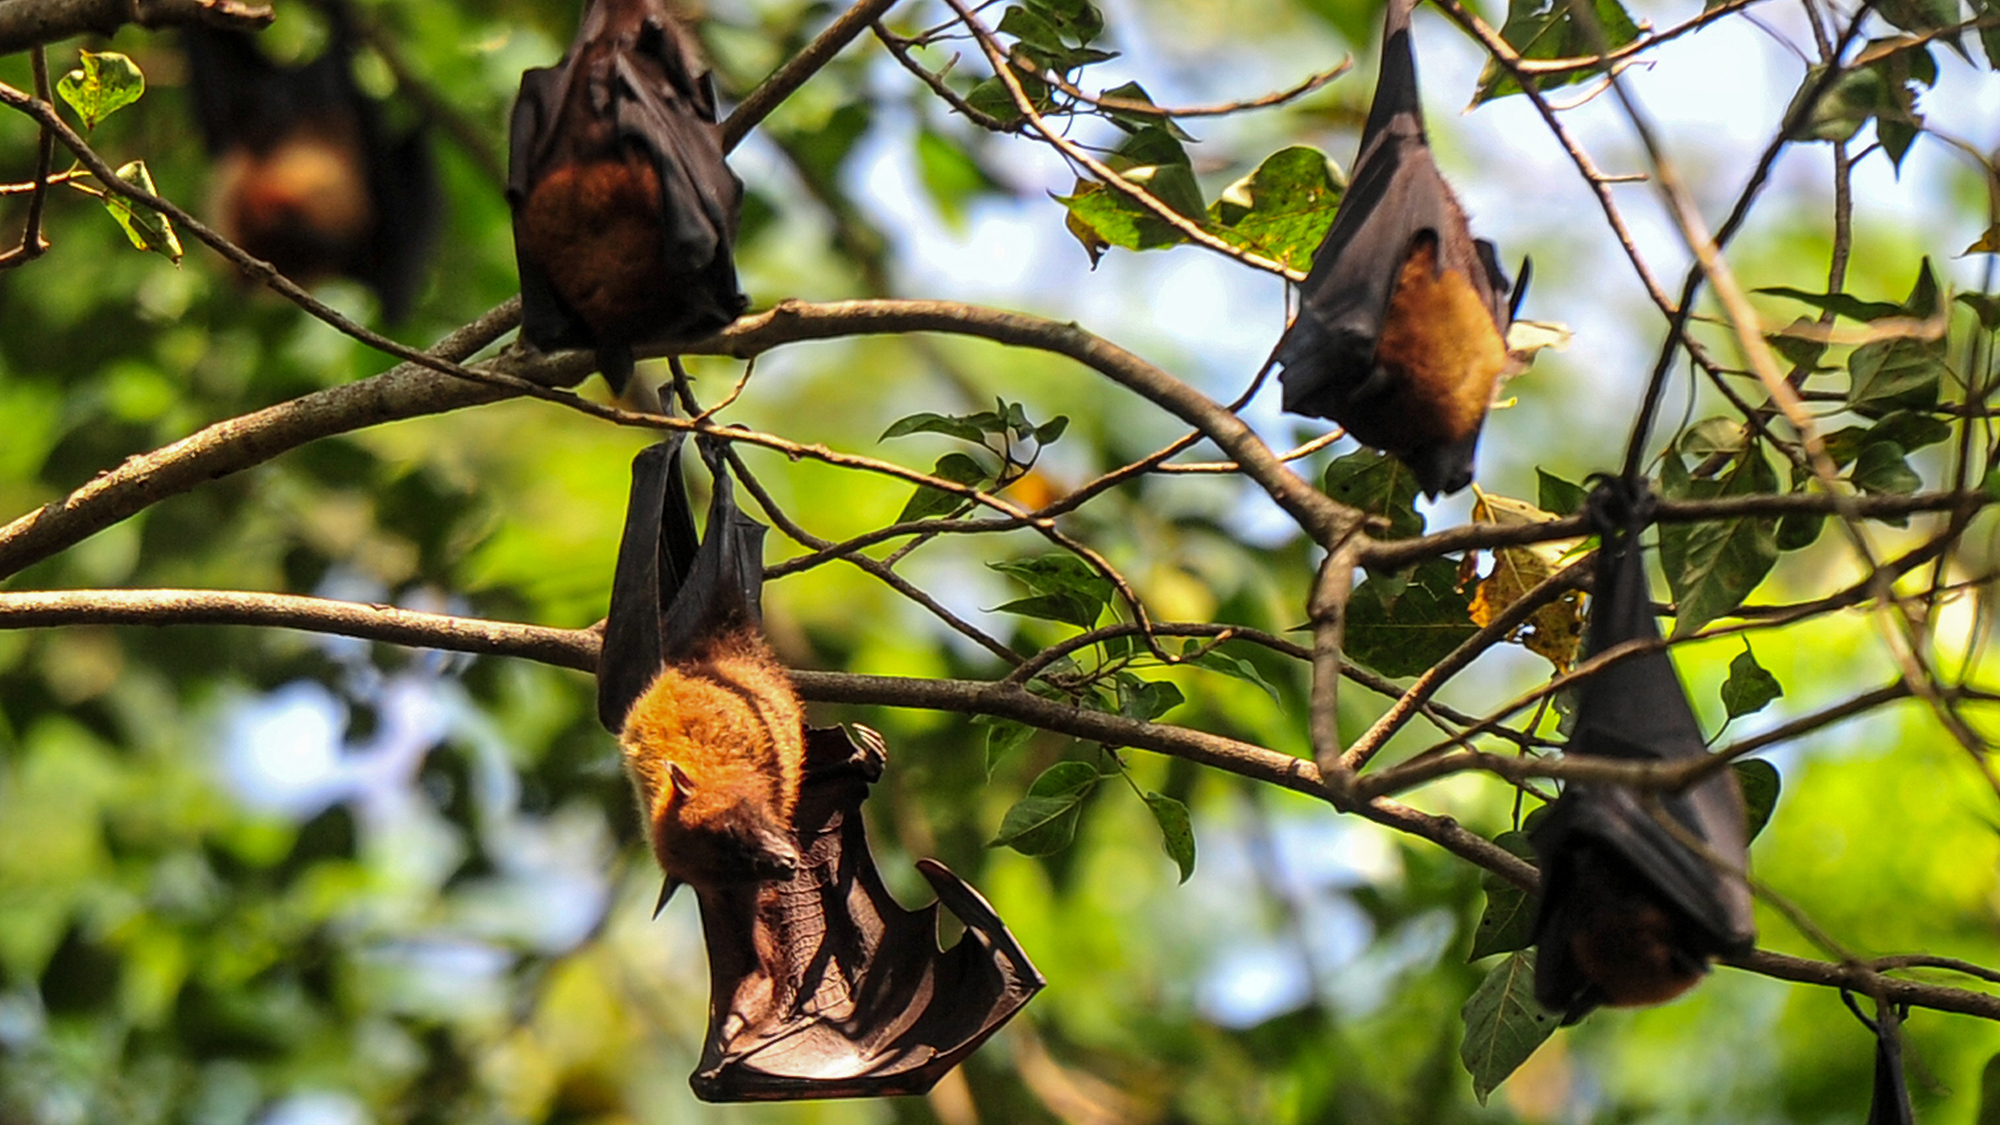 Why fruit bats can eat tons of sugar without getting diabetes